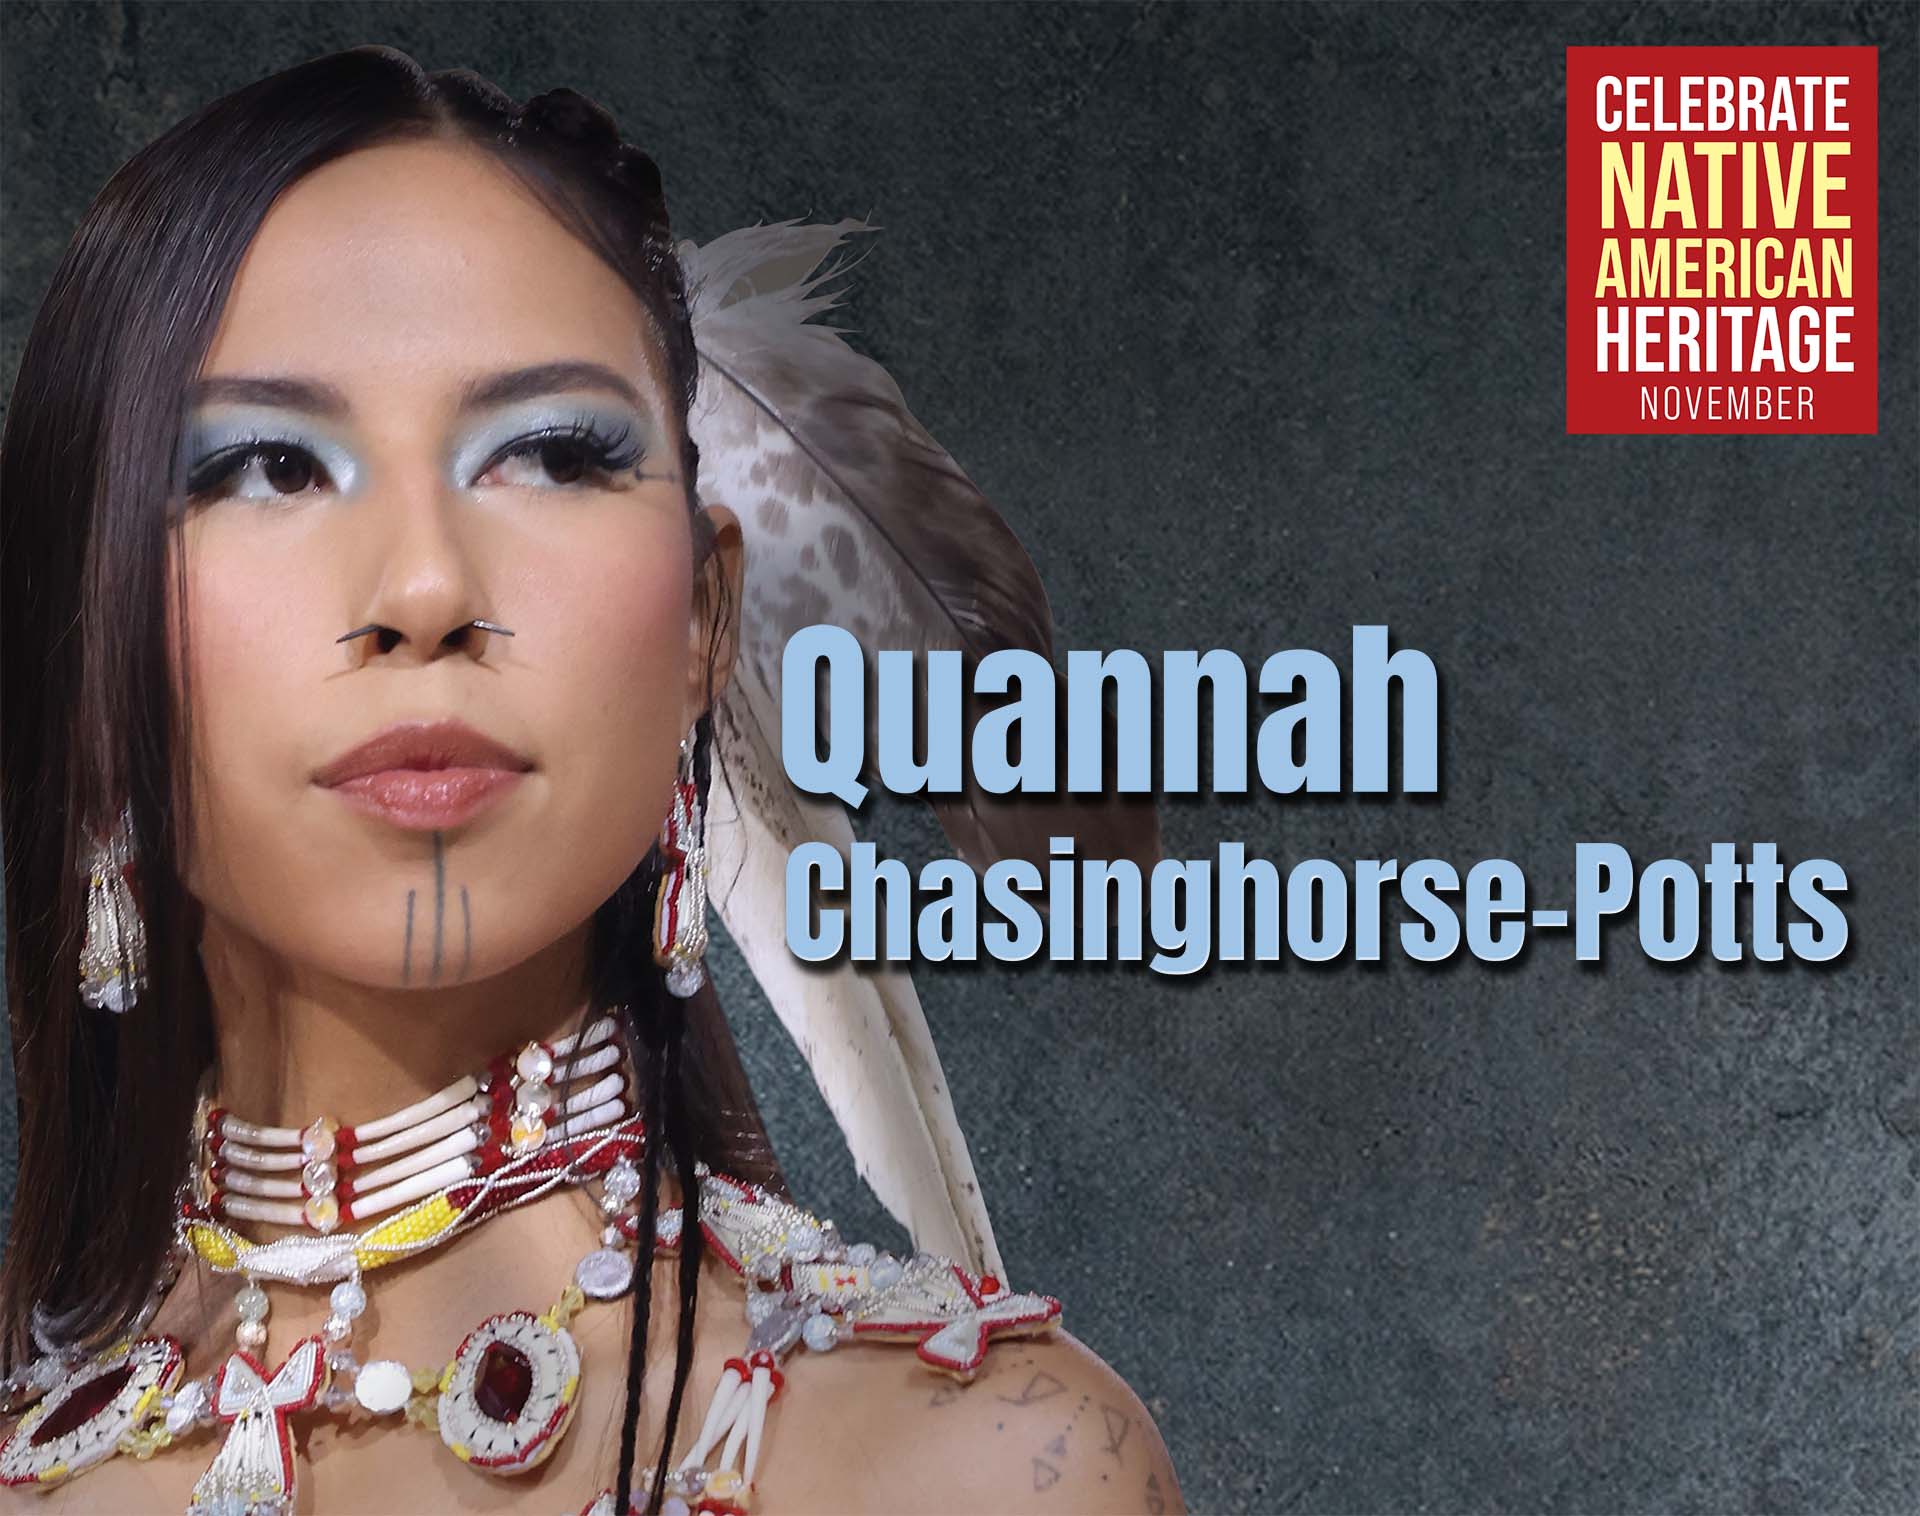 new-poster-celebrates-native-american-heritage-month